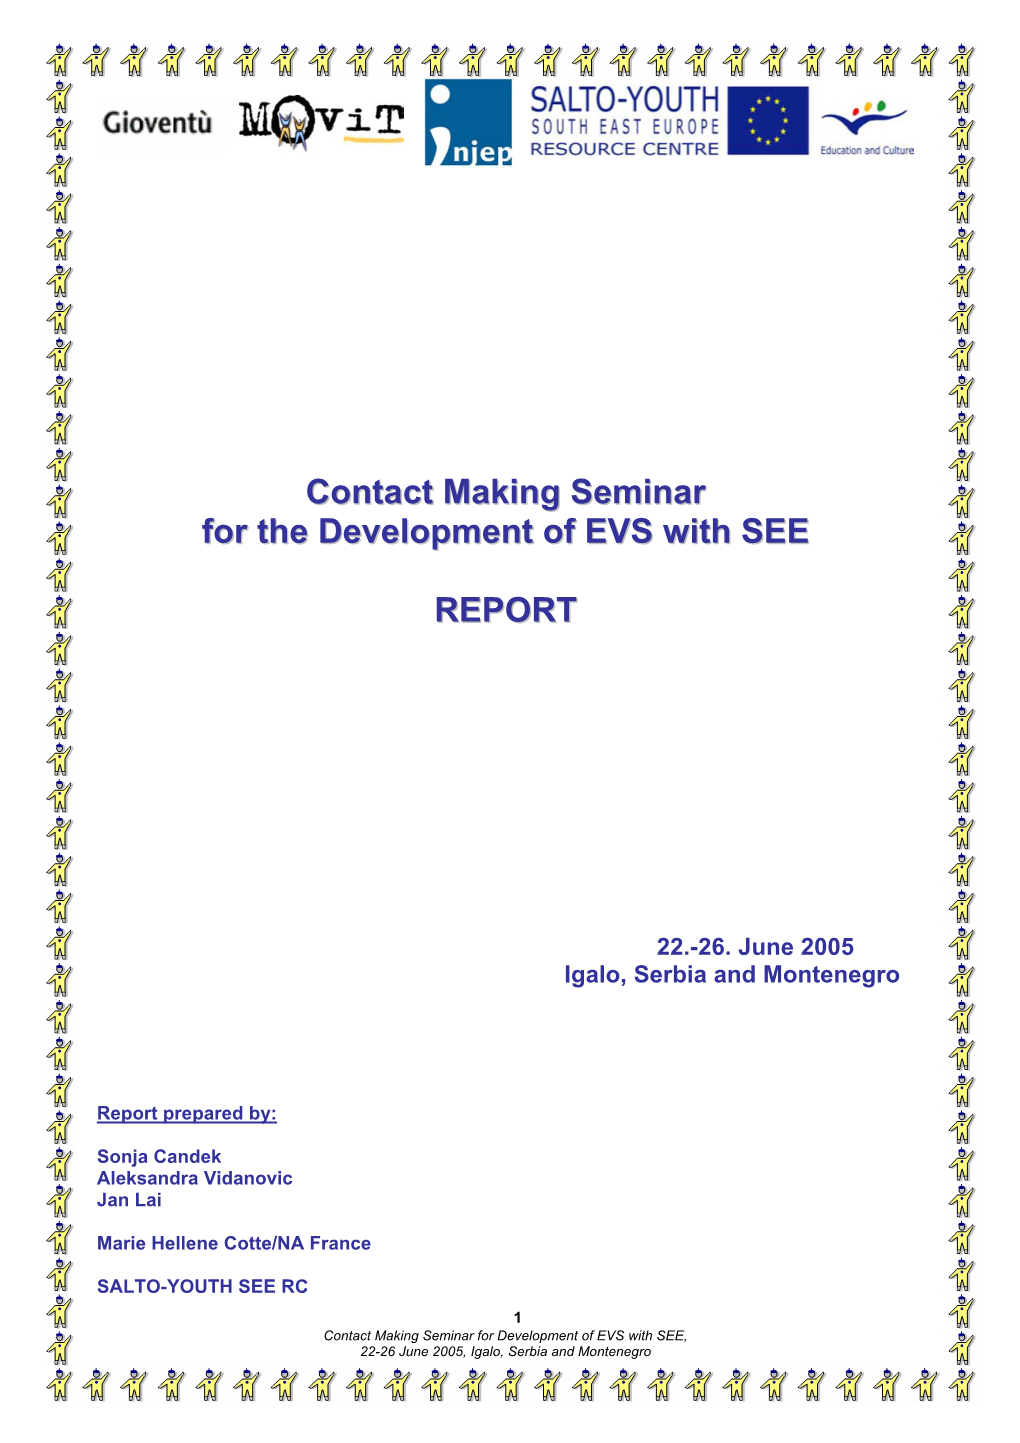 Contact Making Seminar for the Development of EVS with SEE